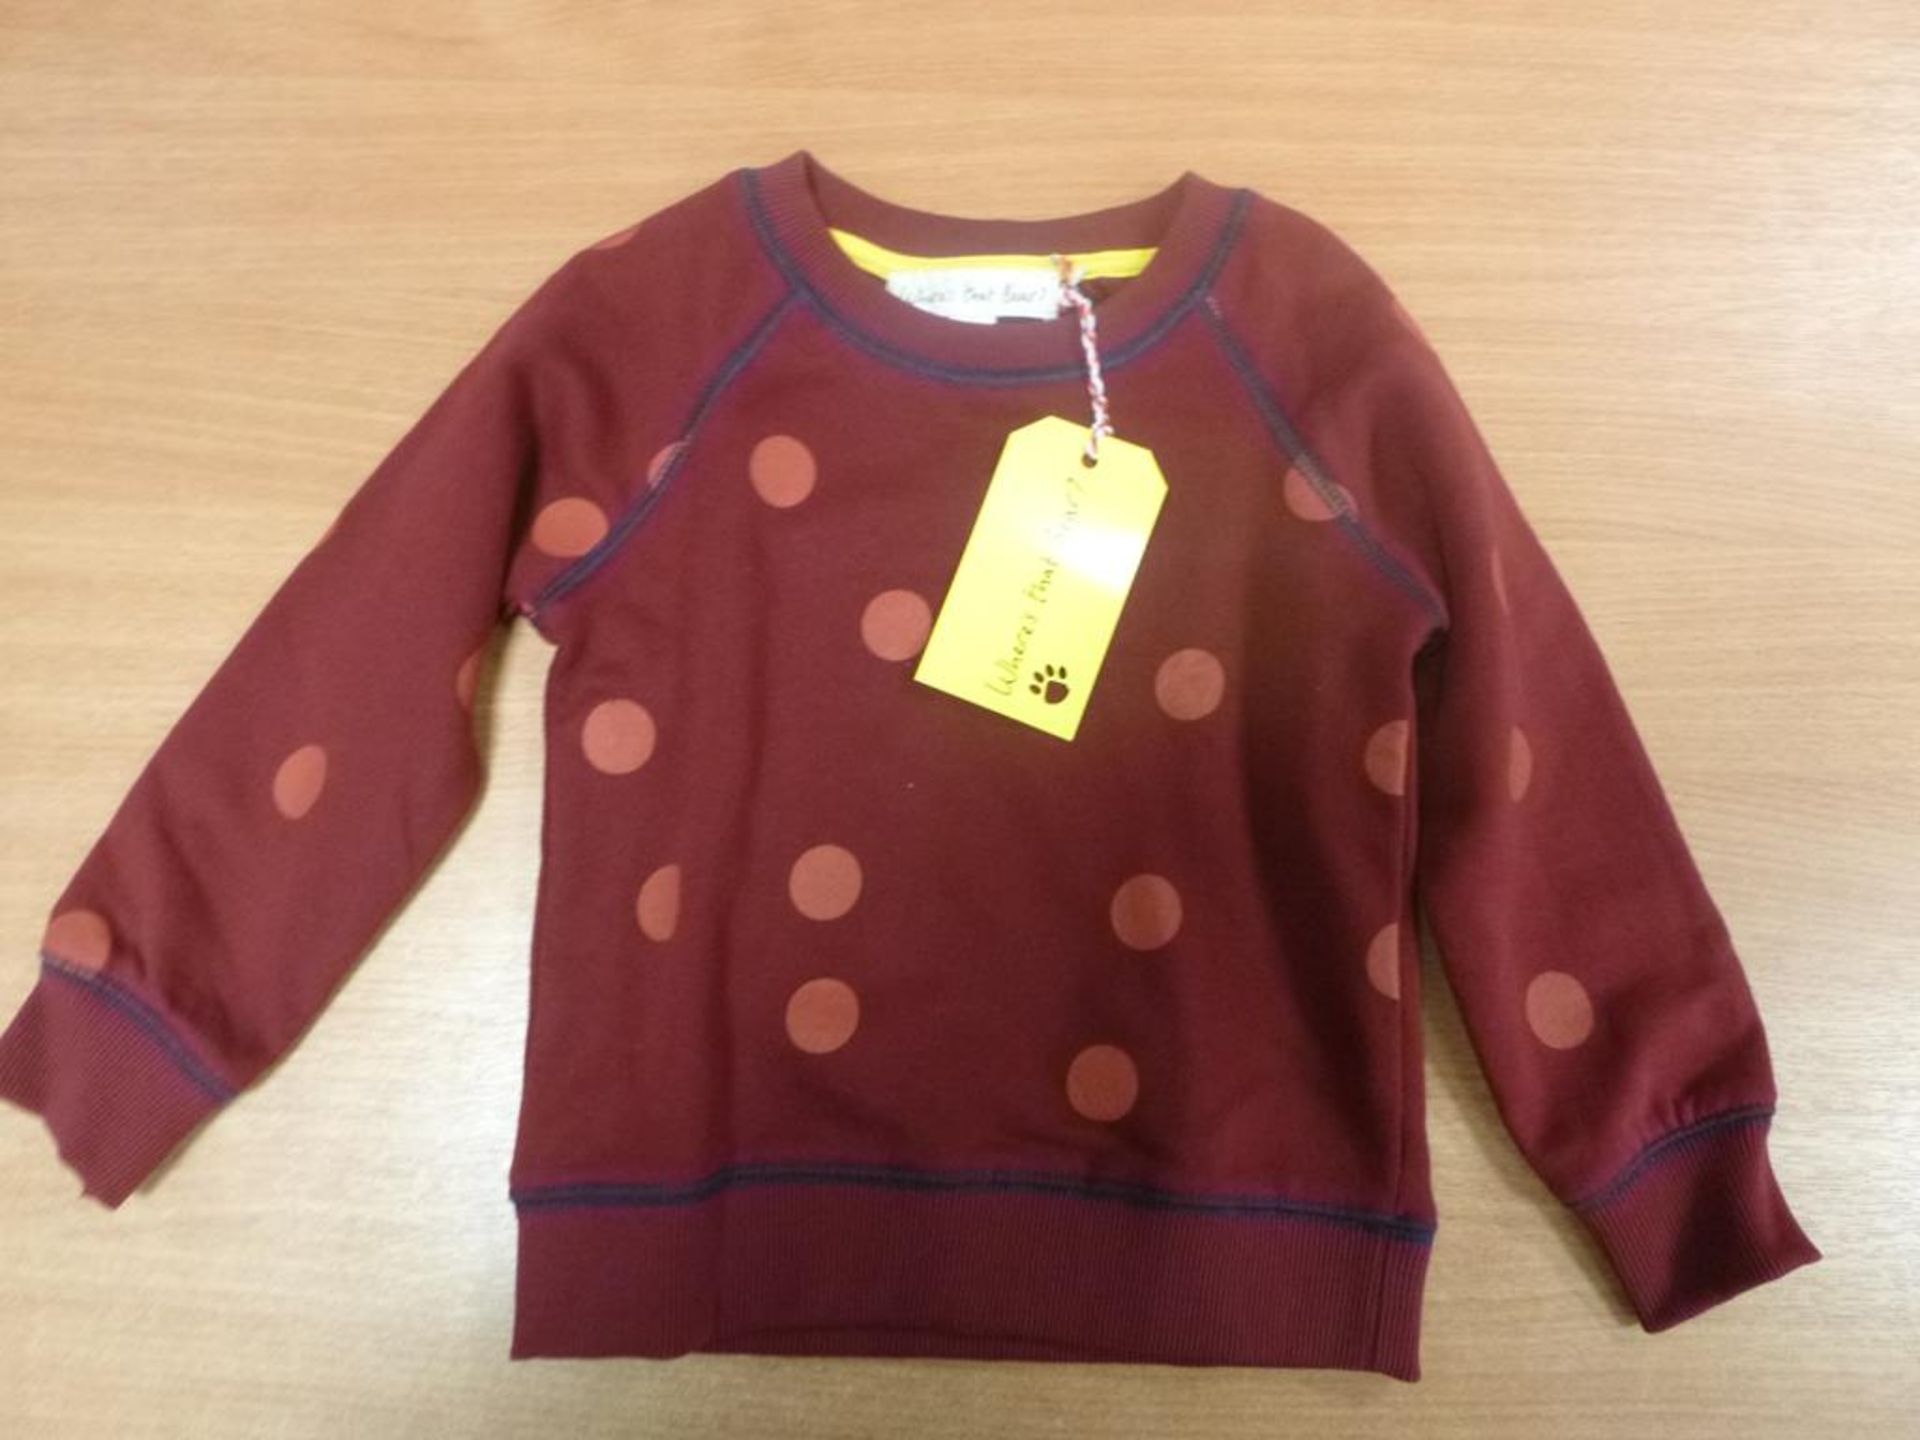 A quantity of Joggers in Dark Berry by 'Where's that Bear' and 6 x Matching Sweaters, sizes 1-2yrs - - Image 2 of 3